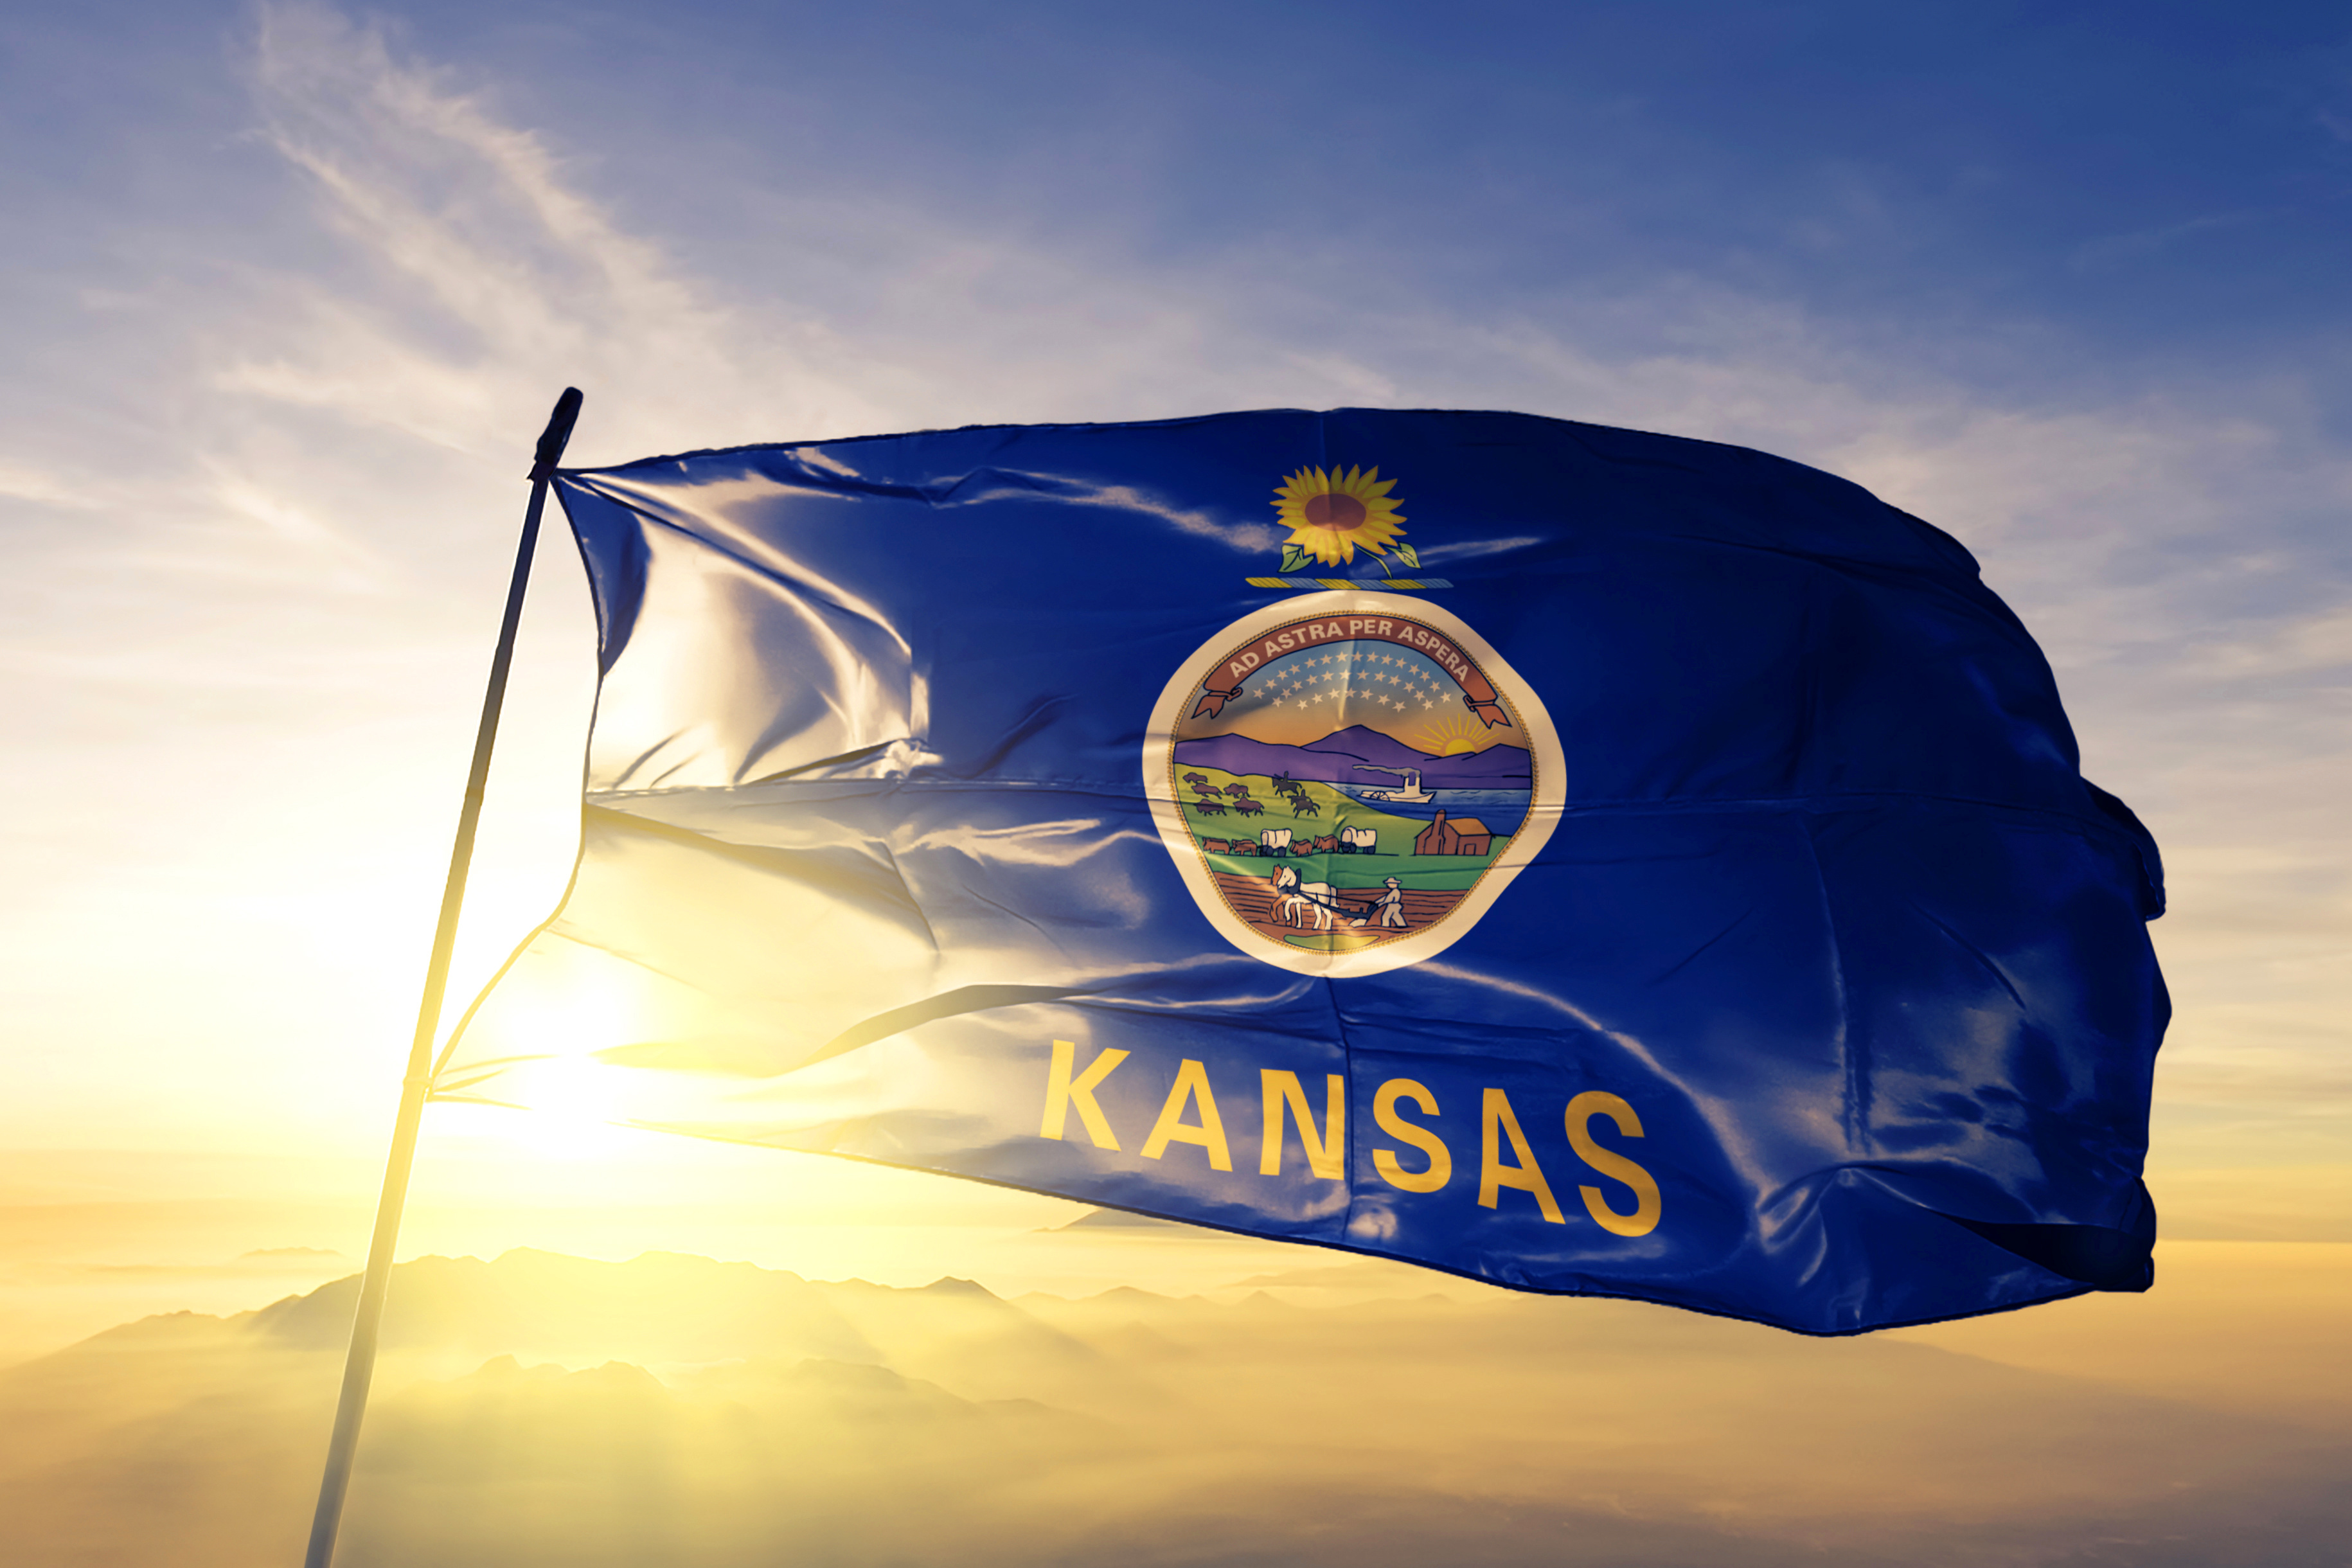 The Kansas state flag blows in the wind while the sun sets behind it across a cloud-streaked sky. 